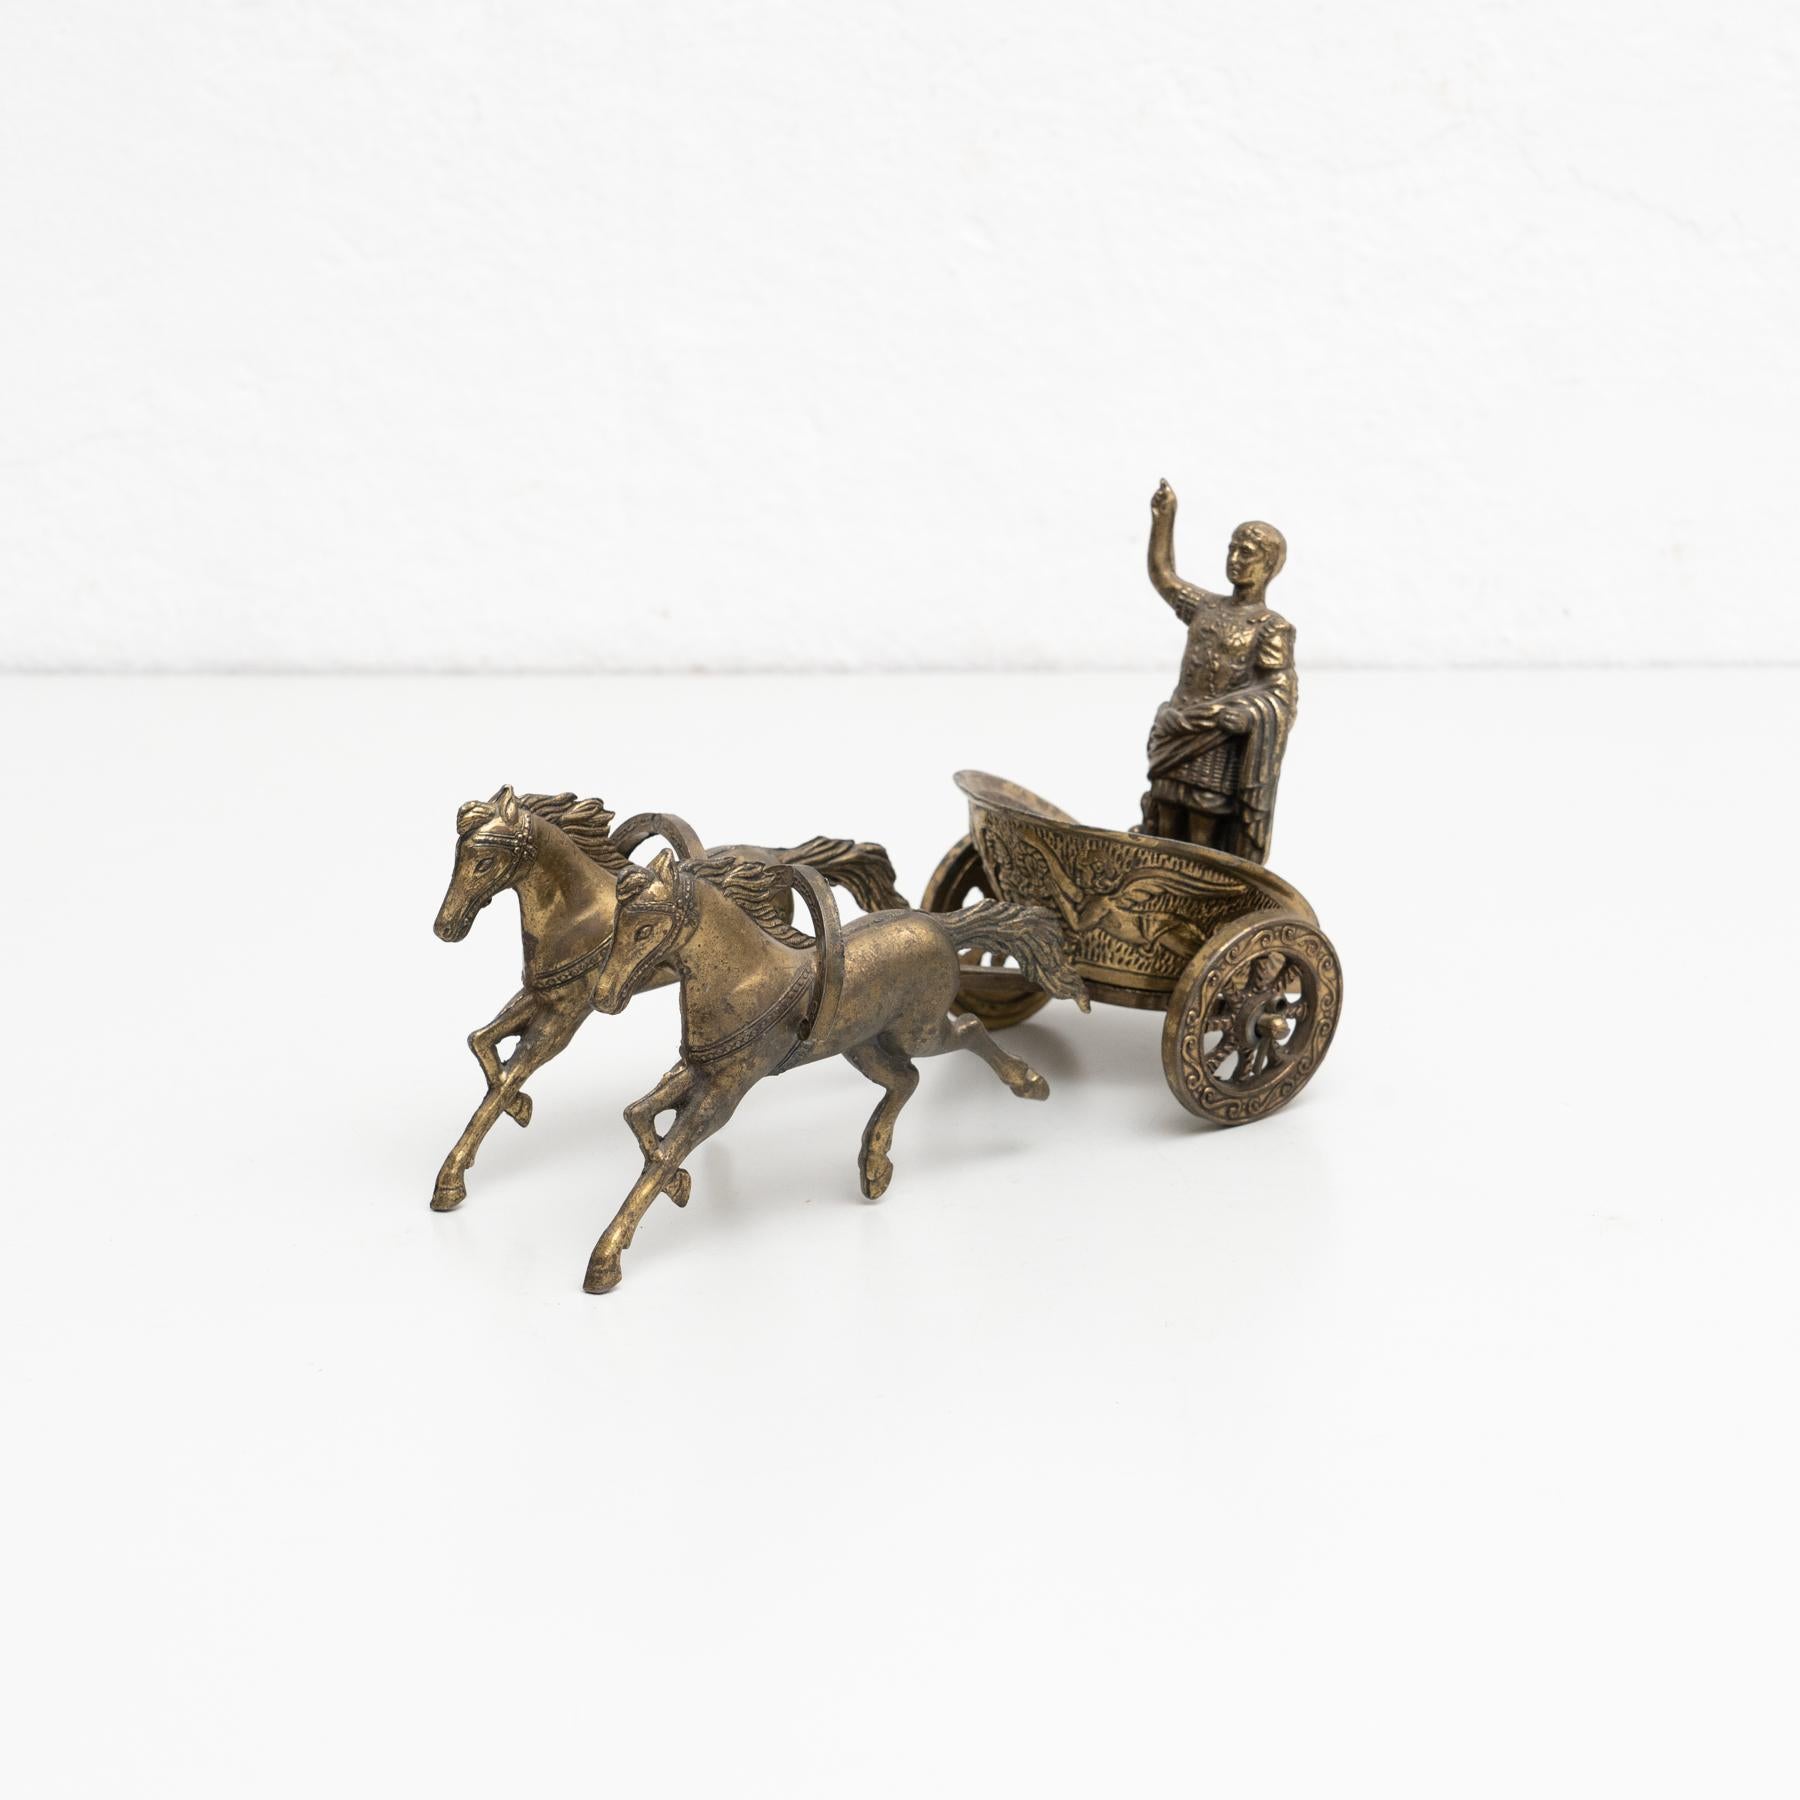 Vintage metal figure of the traditional roman chariot with an olympic symbol stamped.

Made by unknown manufacturer in Spain, circa 1950.

In original condition, wear consistent with age and use, preserving a beautiful